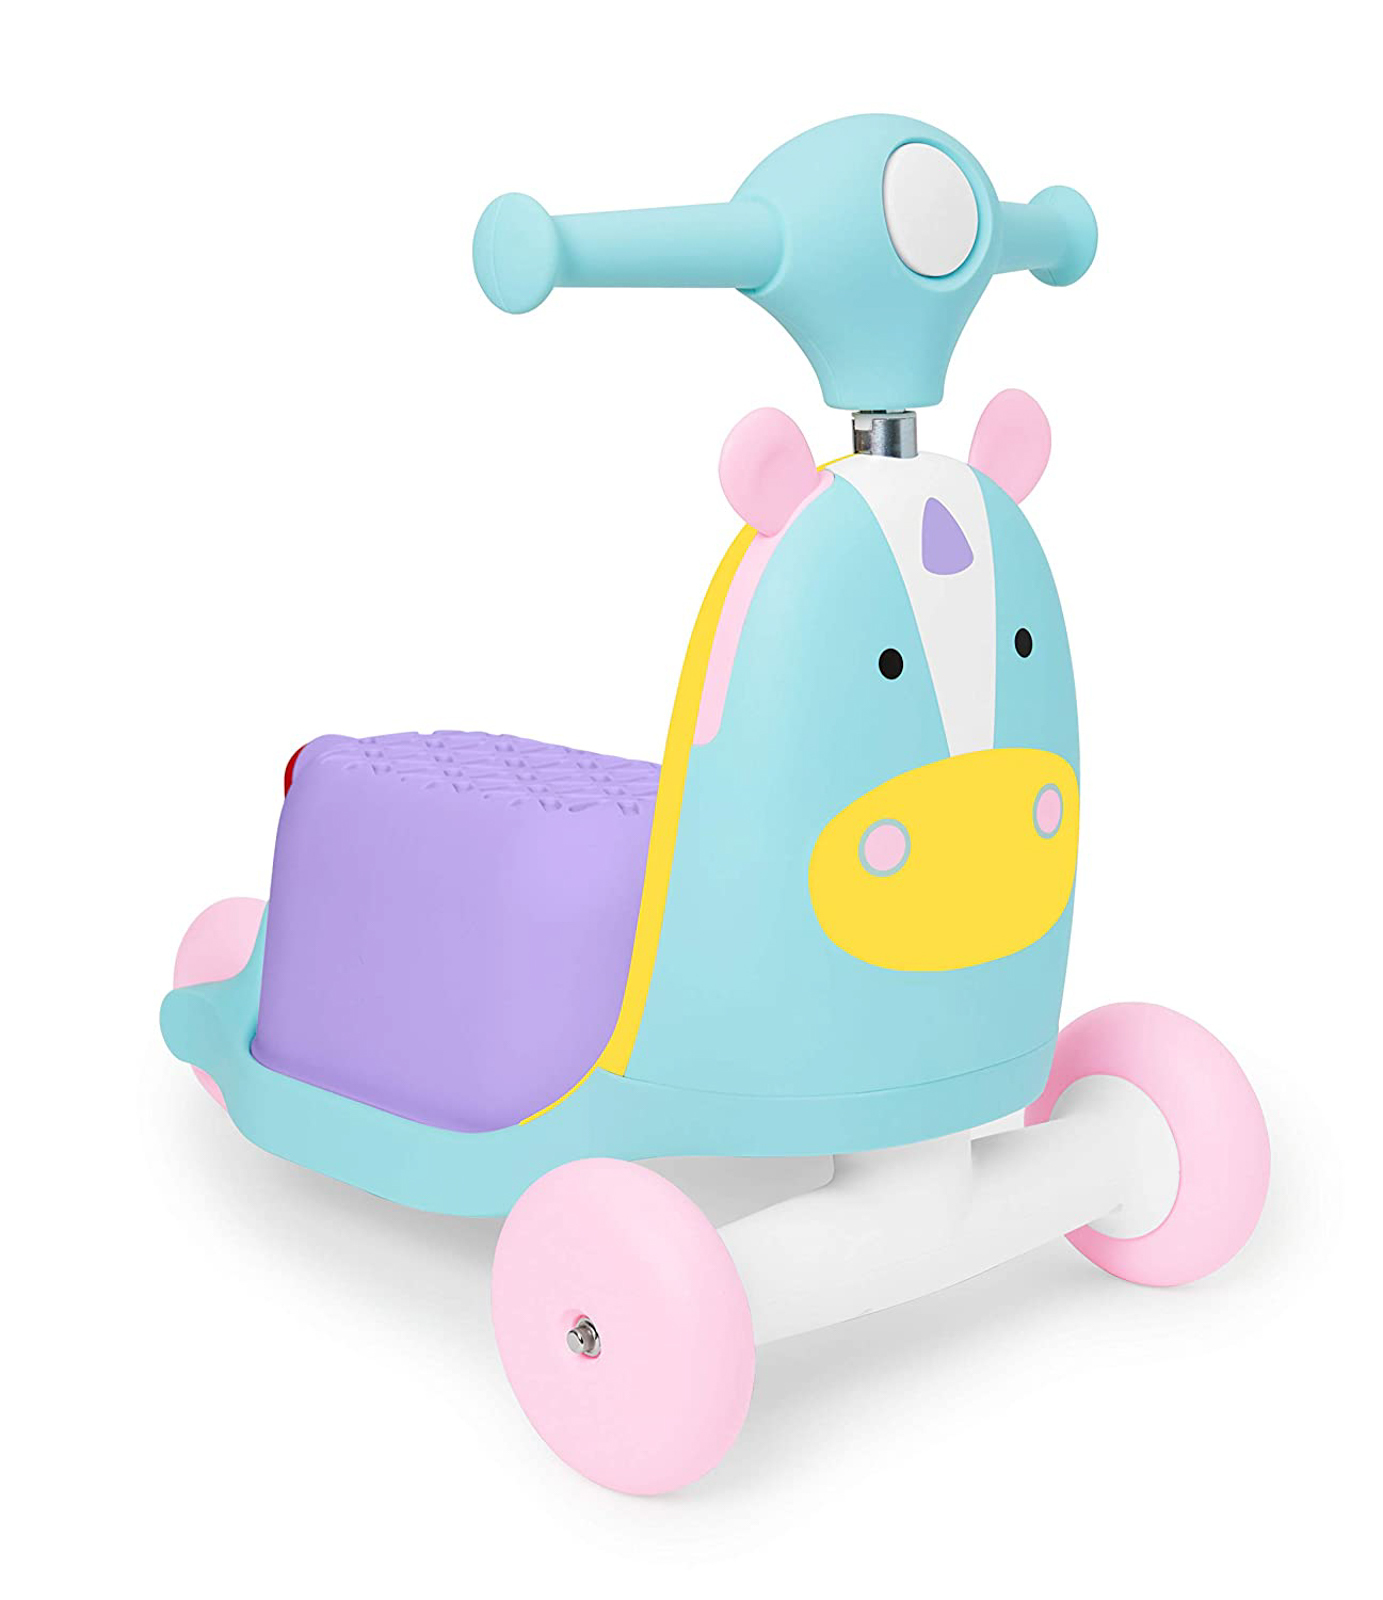 Image contains a Skip Hop Kids 3-in-1 Baby Activity Push Walker & Ride-On Scooter